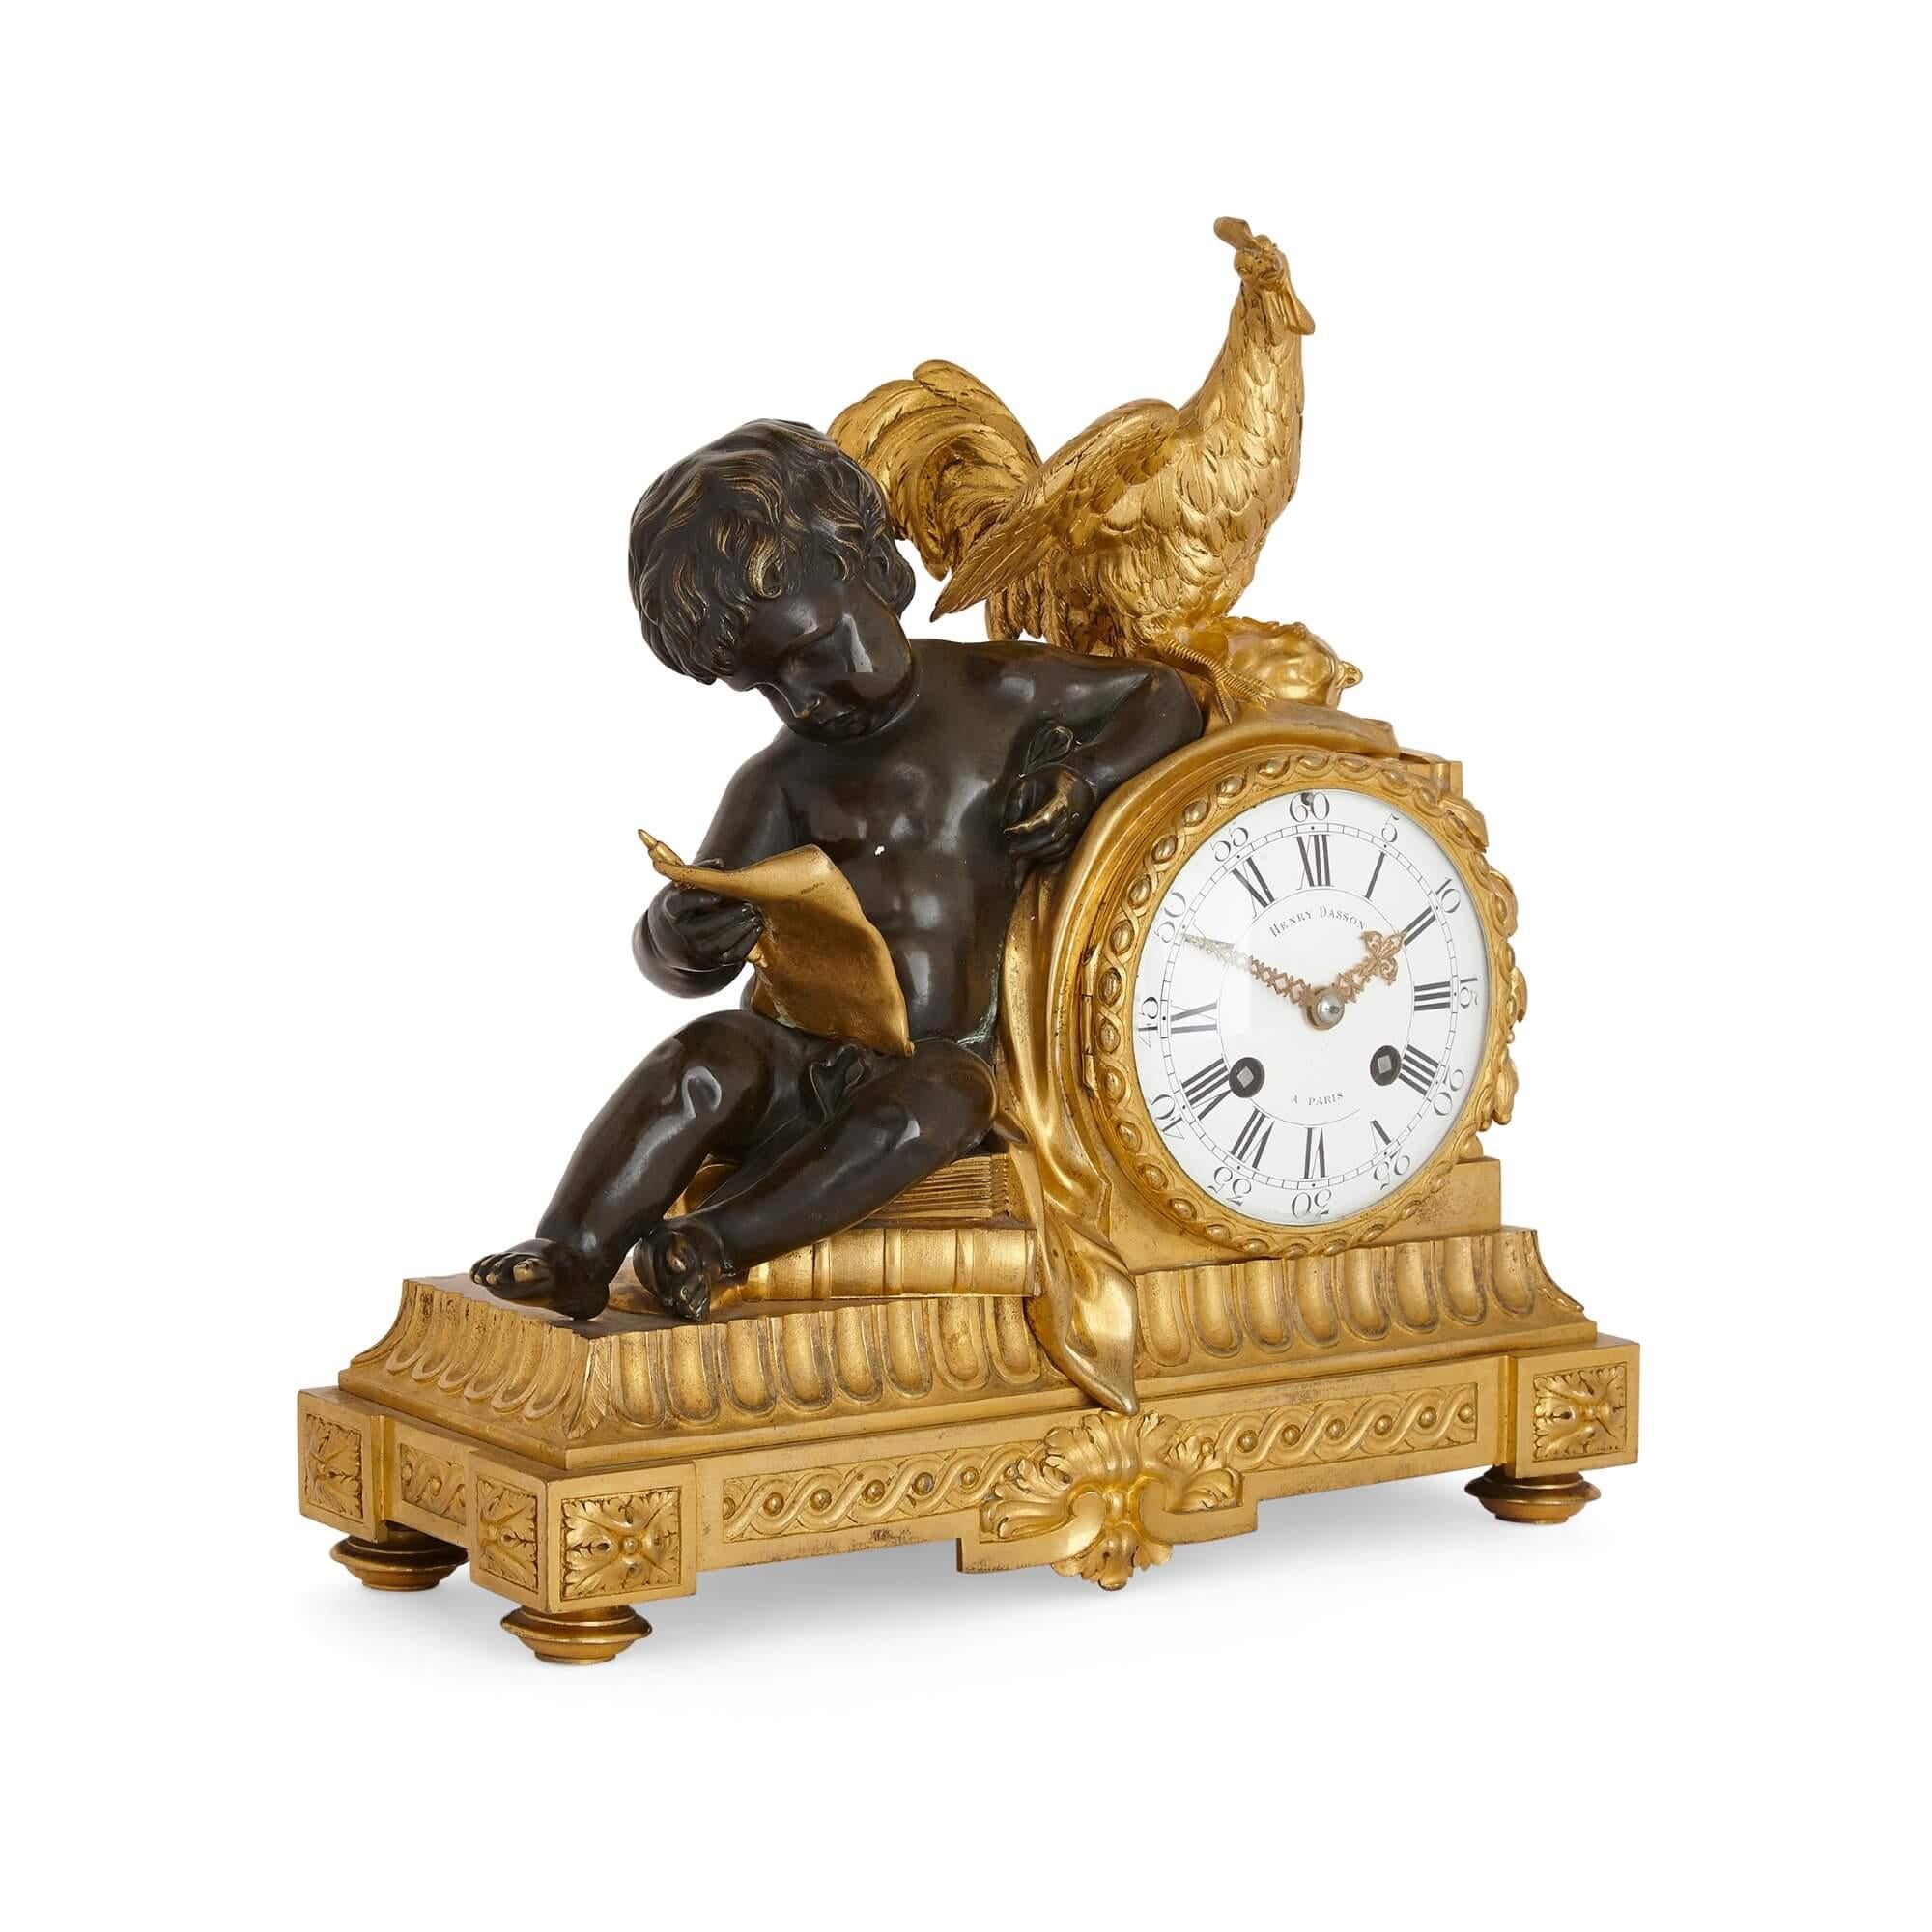 Antique patinated bronze and ormolu figurative mantel clock by Dasson
French, 1888
Measures: Height 30cm, width 30cm, depth 13cm

This fine mantel clock is by the celebrated maker Henry Dasson. The clock features an off-centre design: to the